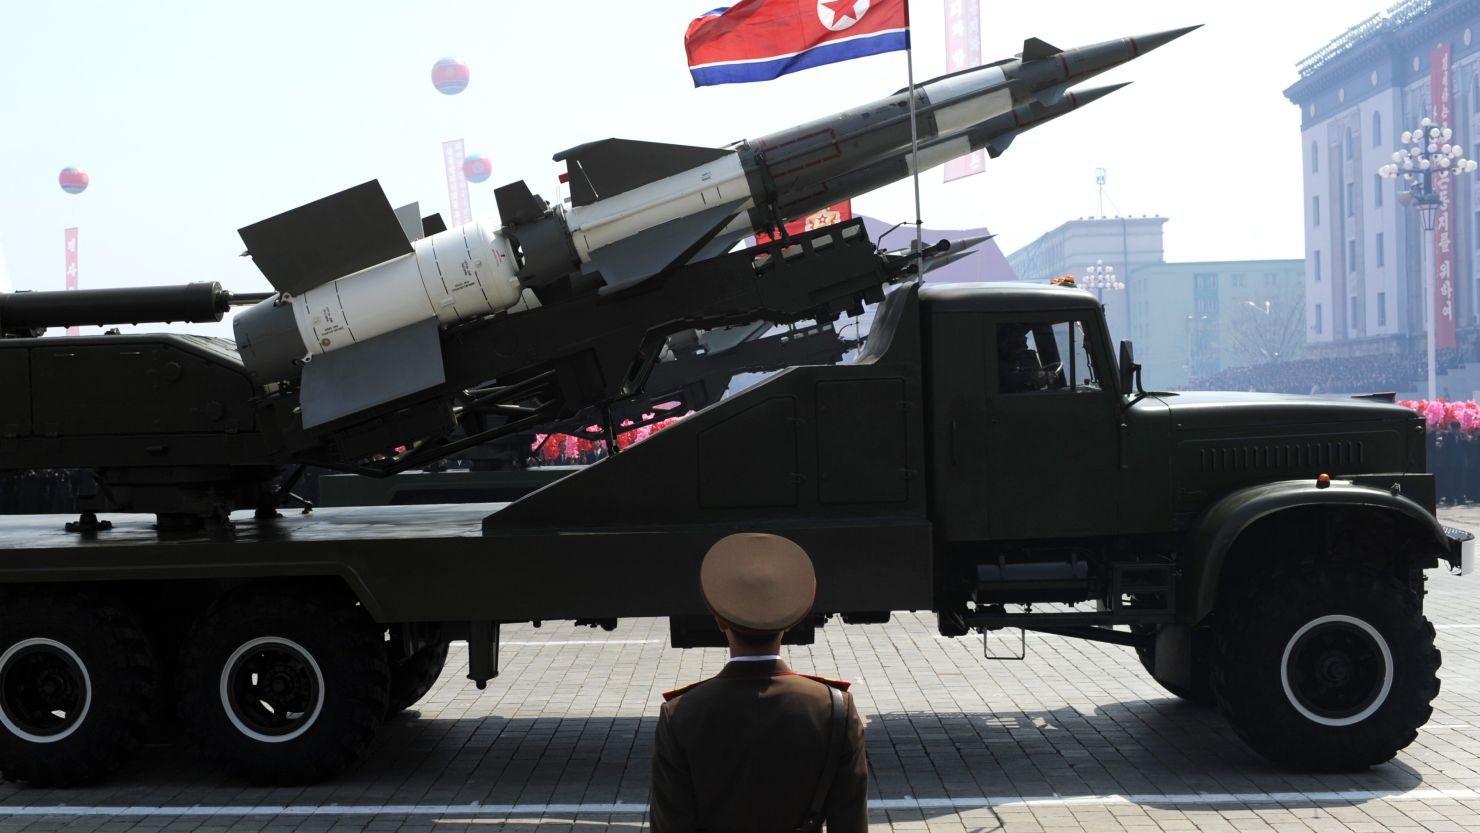 (File photo) A missile is displayed during a military parade in Pyongyang on April 15.